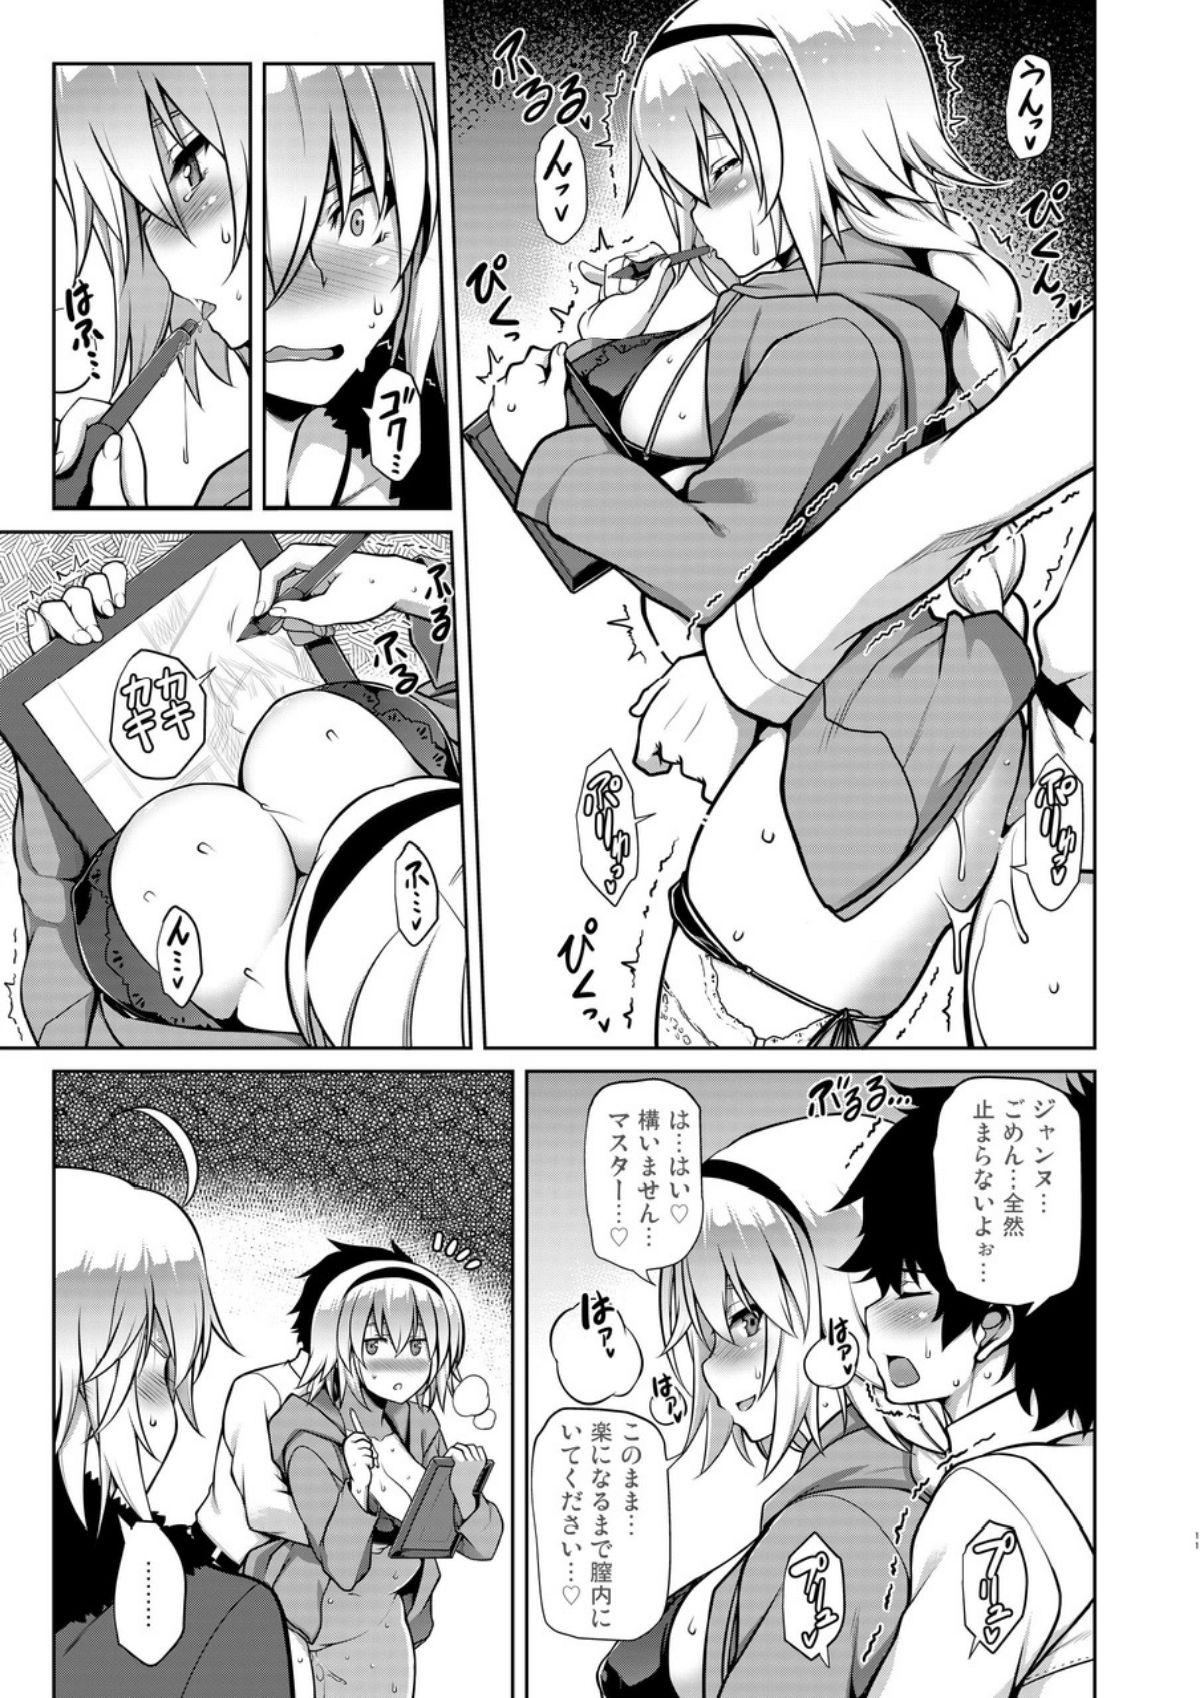 Brunet Itezora no Summer Lady - Fate grand order Curves - Page 10